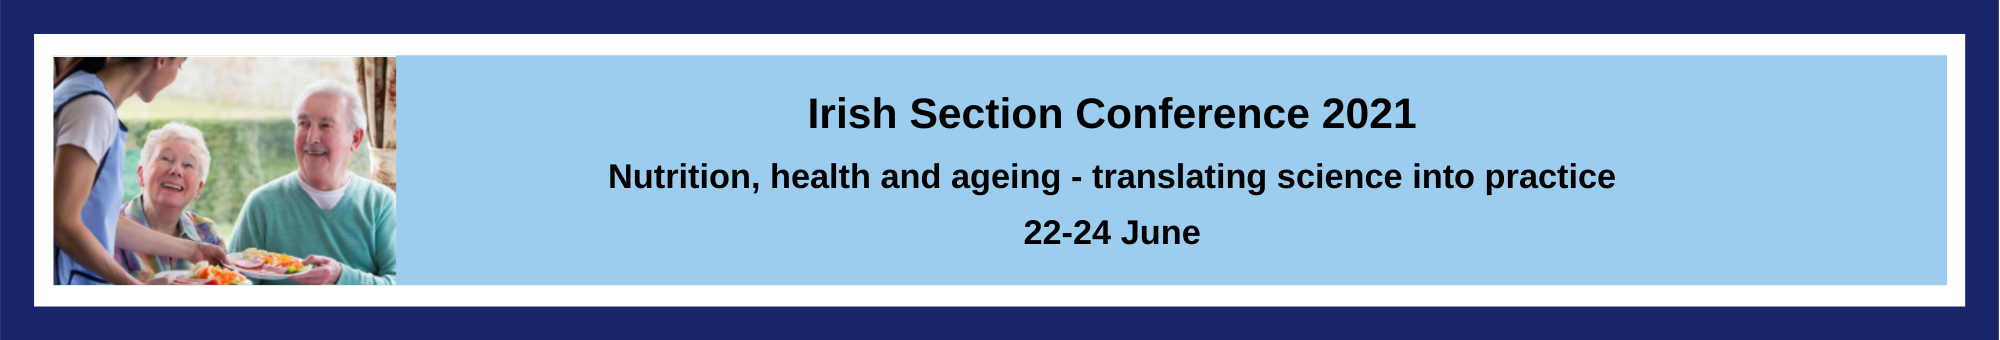 The banner to welcome you to Irish Section Conference 2021: Nutrition, health and ageing - translating science into practice